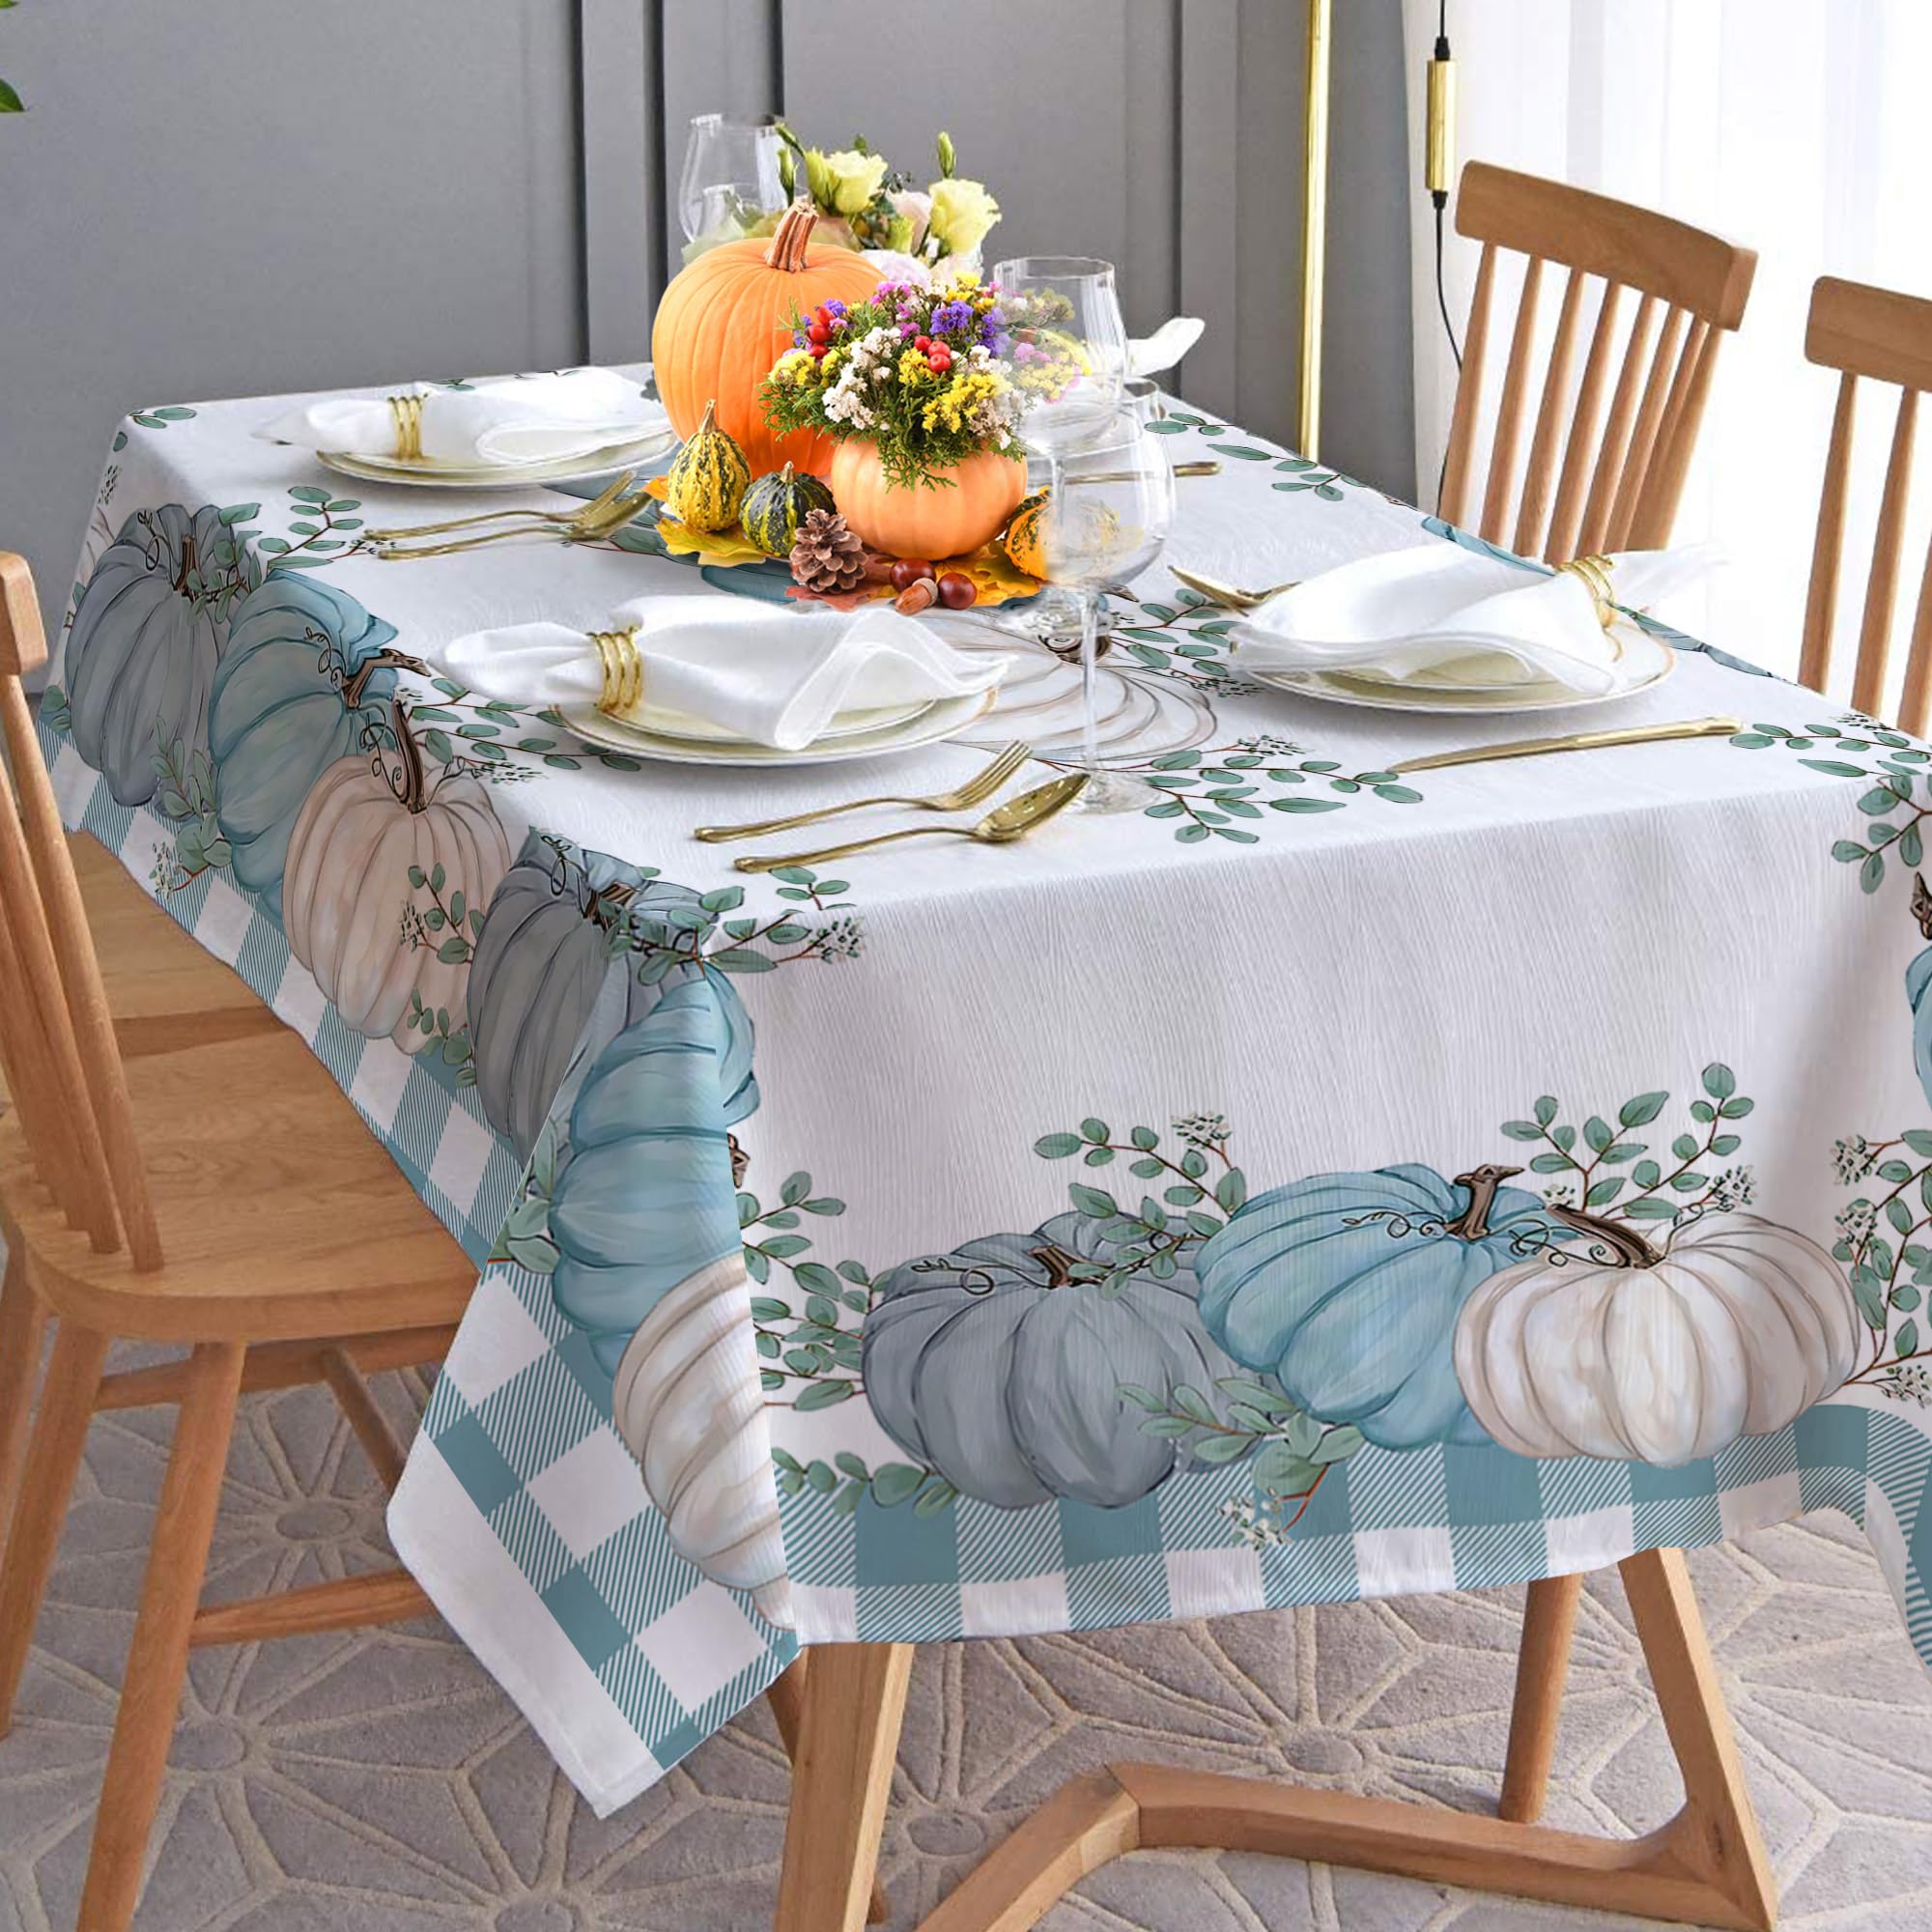 pinata Fall Tablecloth, Teal Buffalo Plaid Pumpkins Table Cloth Rectangle 60x84 inch, Autumn Farmhouse Harvest Fabric Kitchen Table Decorations for Dinner, Parties, Fall Indoor or Outdoor Decor